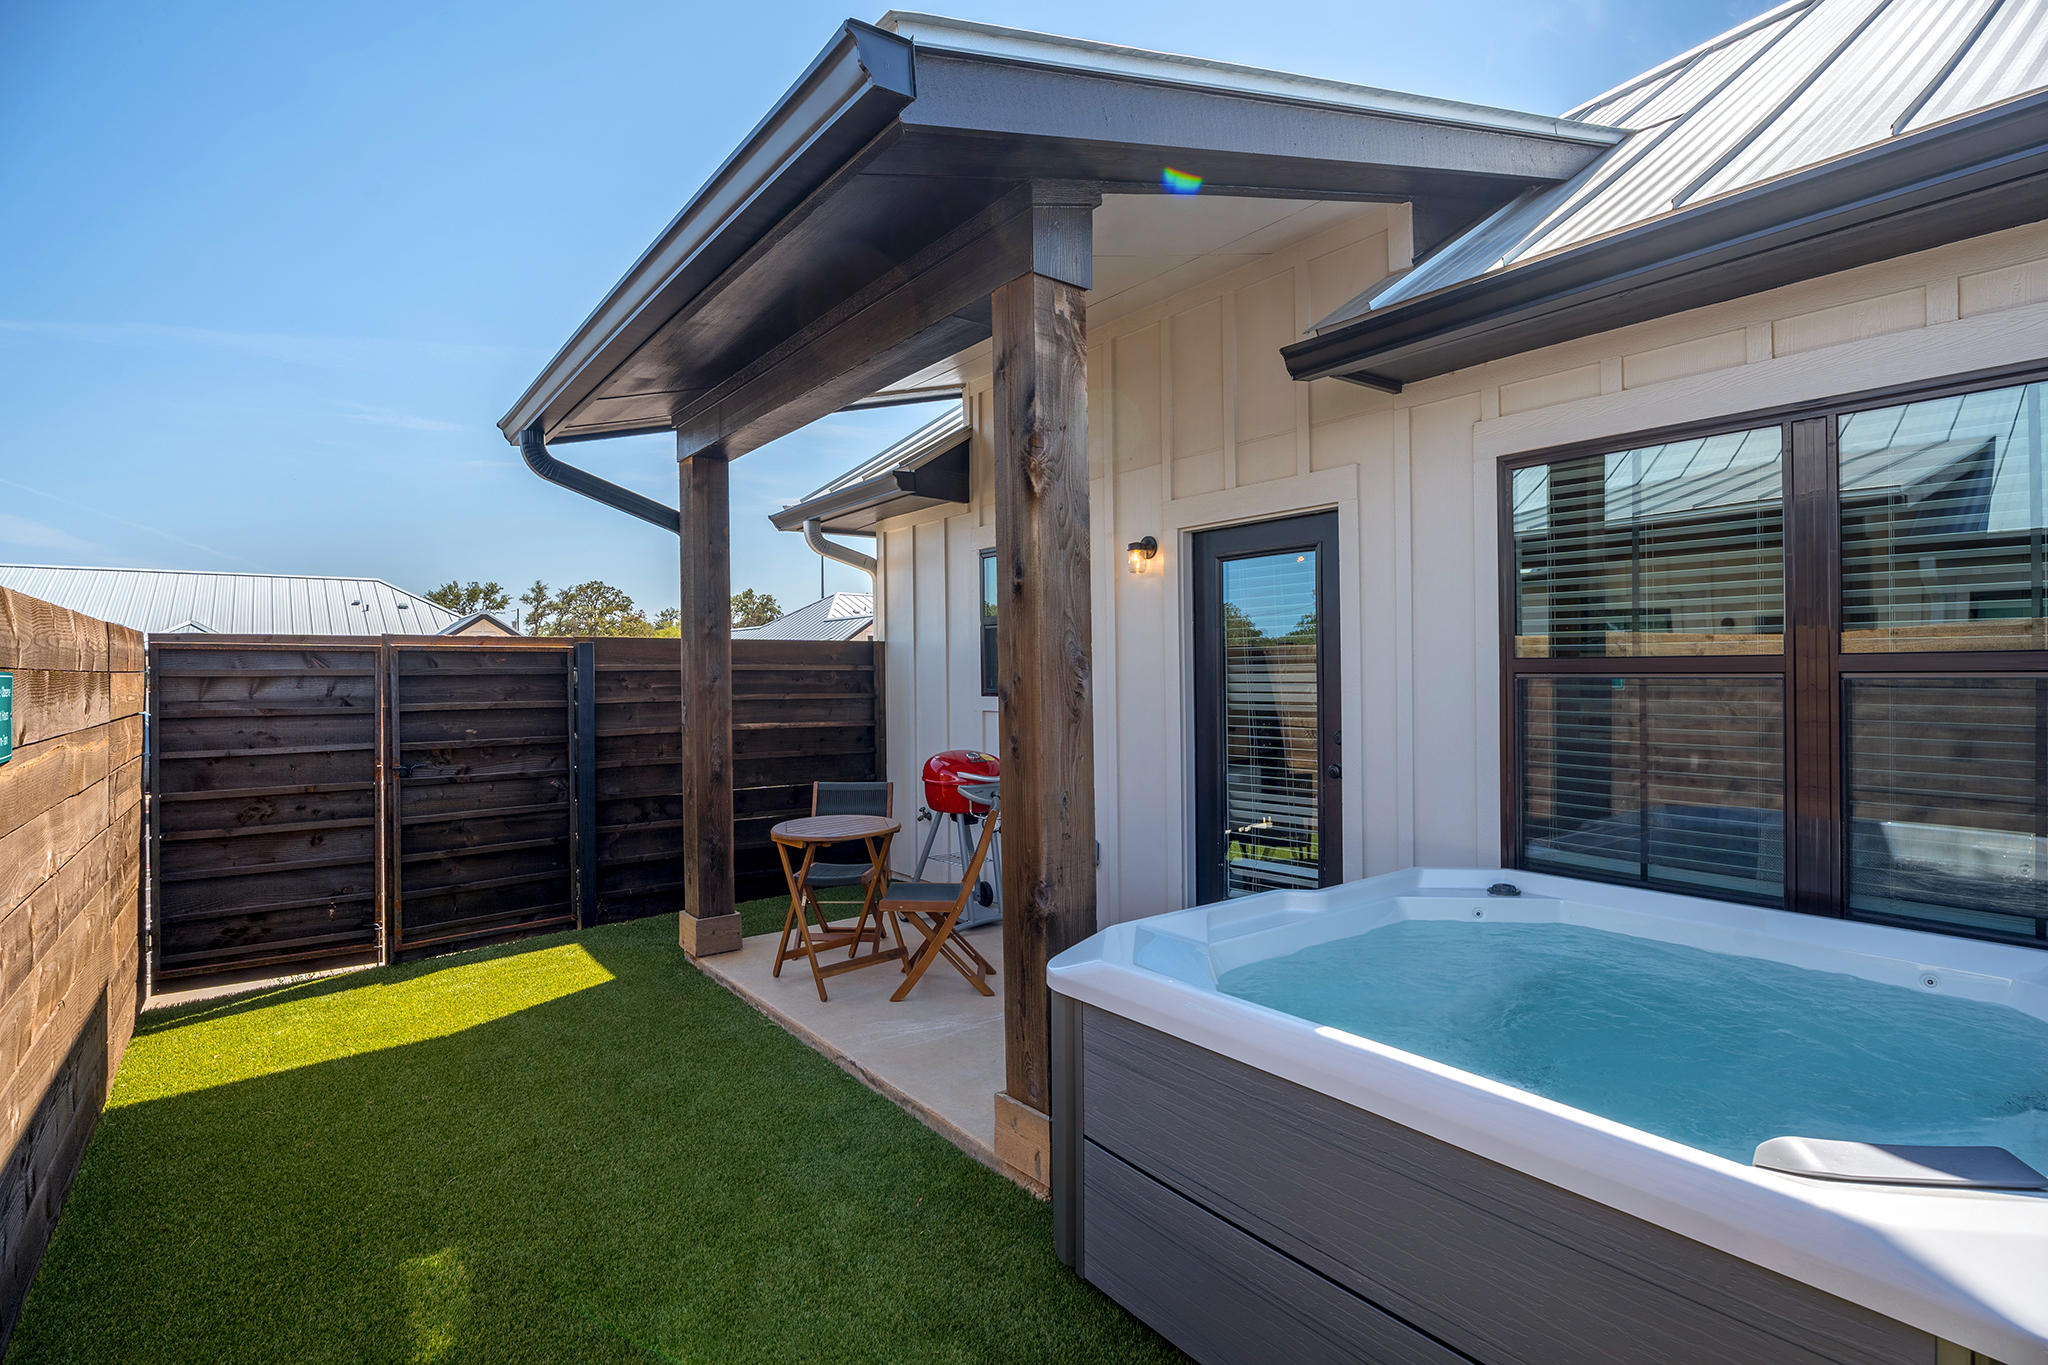 Unwind in the new hot tub.